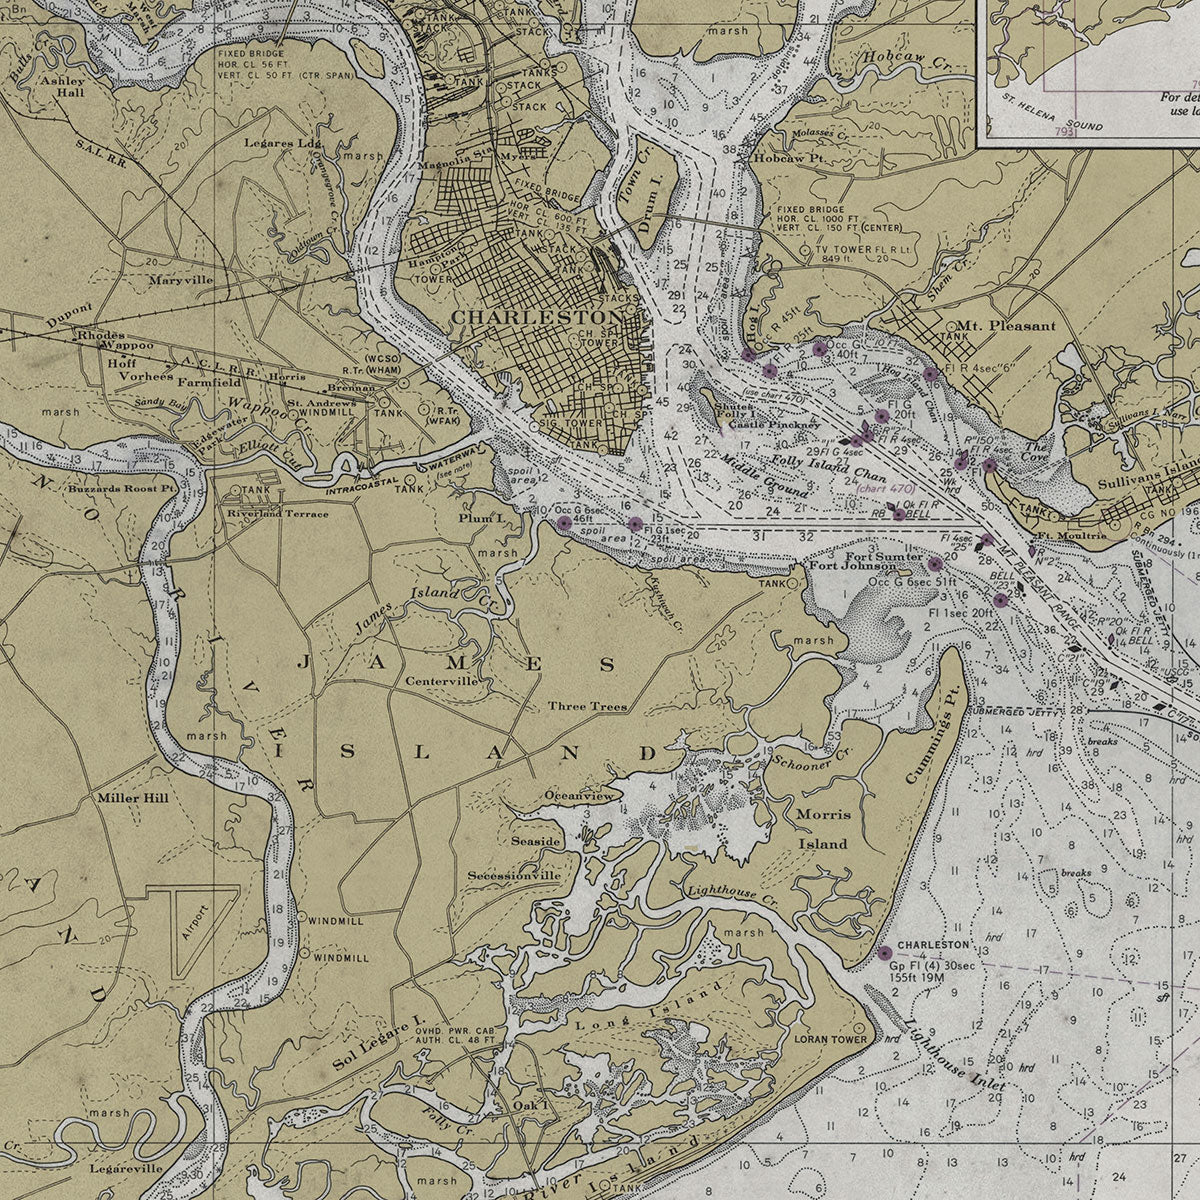 Old Charleston Approaches nautical chart vintage wall art. Shop Archive Print Co.